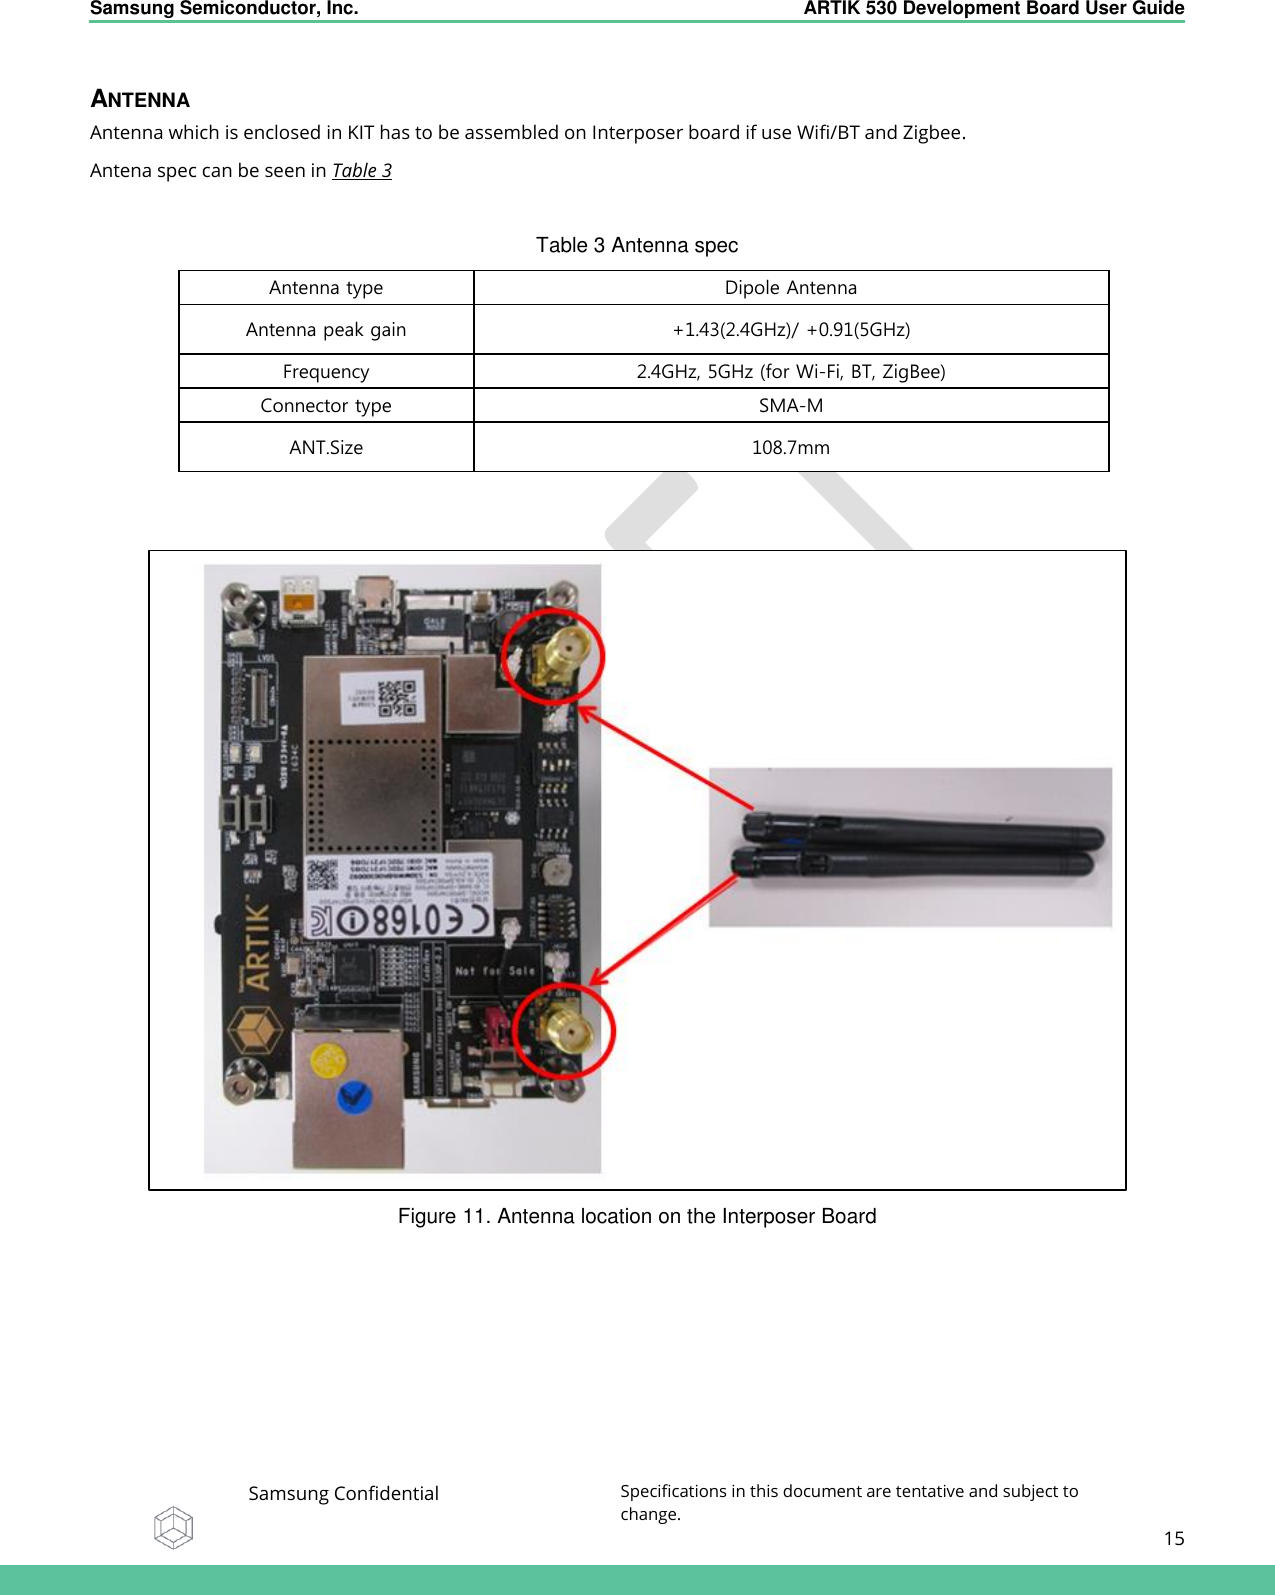    Samsung Semiconductor, Inc.  ARTIK 530 Development Board User Guide   Samsung Confidential Specifications in this document are tentative and subject to change.  15    ANTENNA Antenna which is enclosed in KIT has to be assembled on Interposer board if use Wifi/BT and Zigbee.  Antena spec can be seen in Table 3  Table 3 Antenna spec Antenna type Dipole Antenna Antenna peak gain +1.43(2.4GHz)/ +0.91(5GHz) Frequency 2.4GHz, 5GHz (for Wi-Fi, BT, ZigBee) Connector type SMA-M ANT.Size 108.7mm    Figure 11. Antenna location on the Interposer Board  